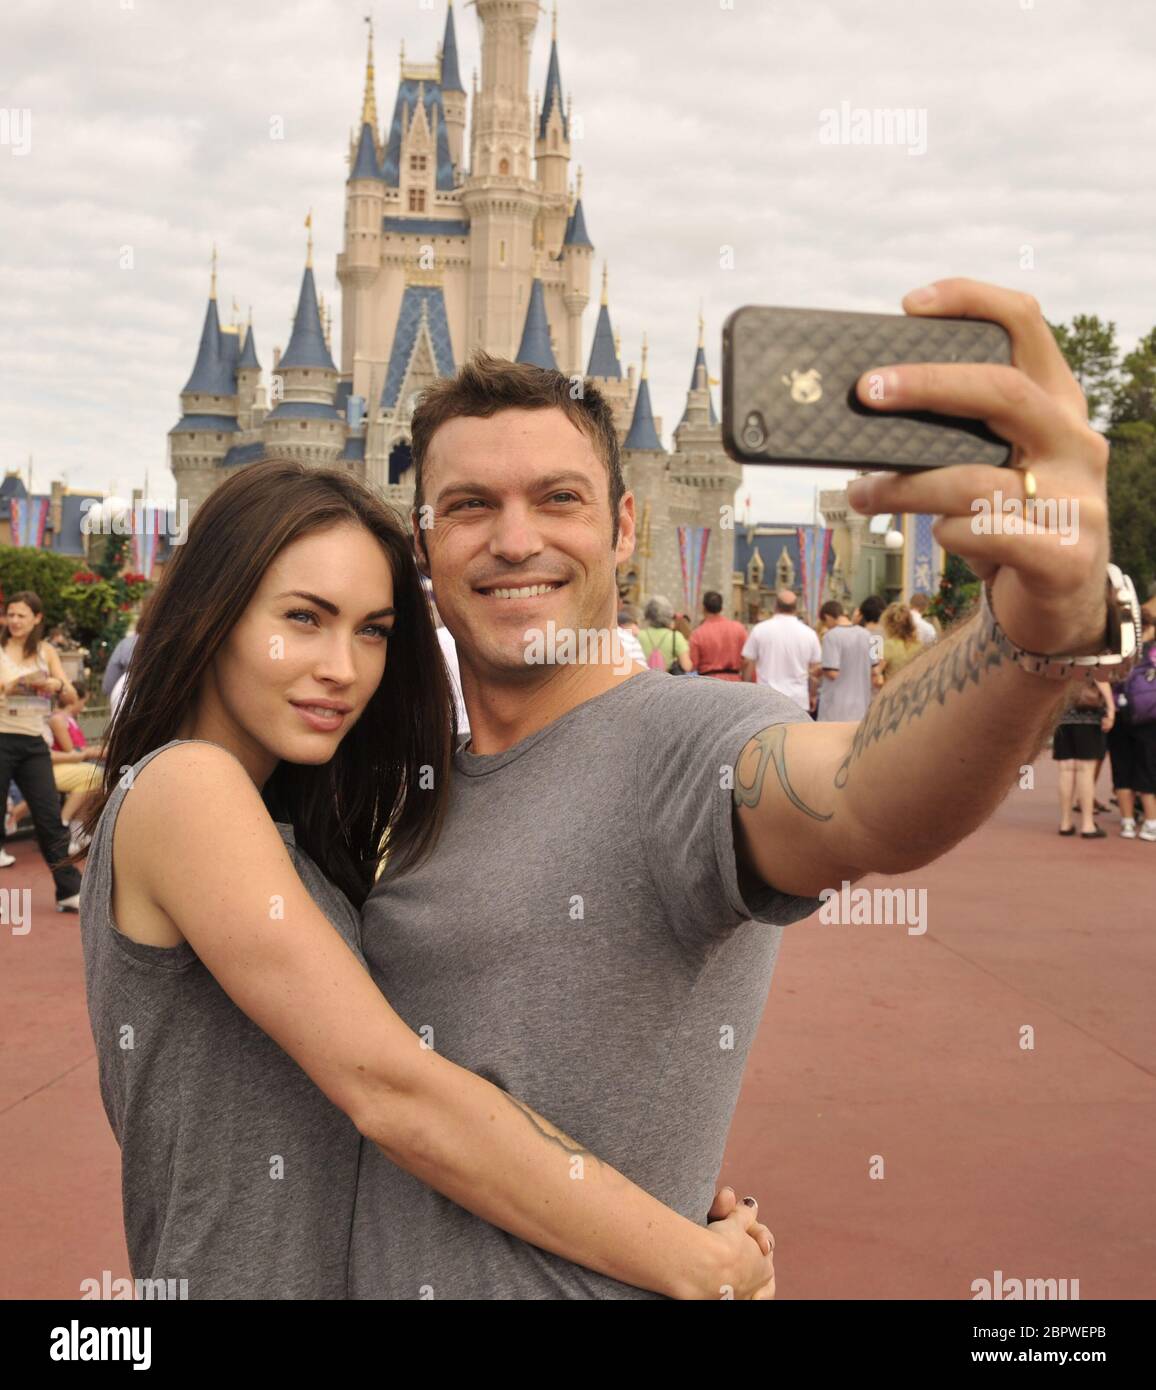 (Nov. 26, 2010): Actor Brian Austin Green (right) and his wife, actress/model Megan Fox (left), take a souvenir photo Nov. 26, 2010 in the Magic Kingdom in Lake Buena Vista, Fla. Green ('Beverly Hills, 90210', 'Desperate Housewives') and Fox ('Transformers,' 'Transformers: Revenge of the Fallen') were married in June 2010 in Hawaii. People: Megan Fox Brian Austin Green Credit: Storms Media Group/Alamy Live News Stock Photo